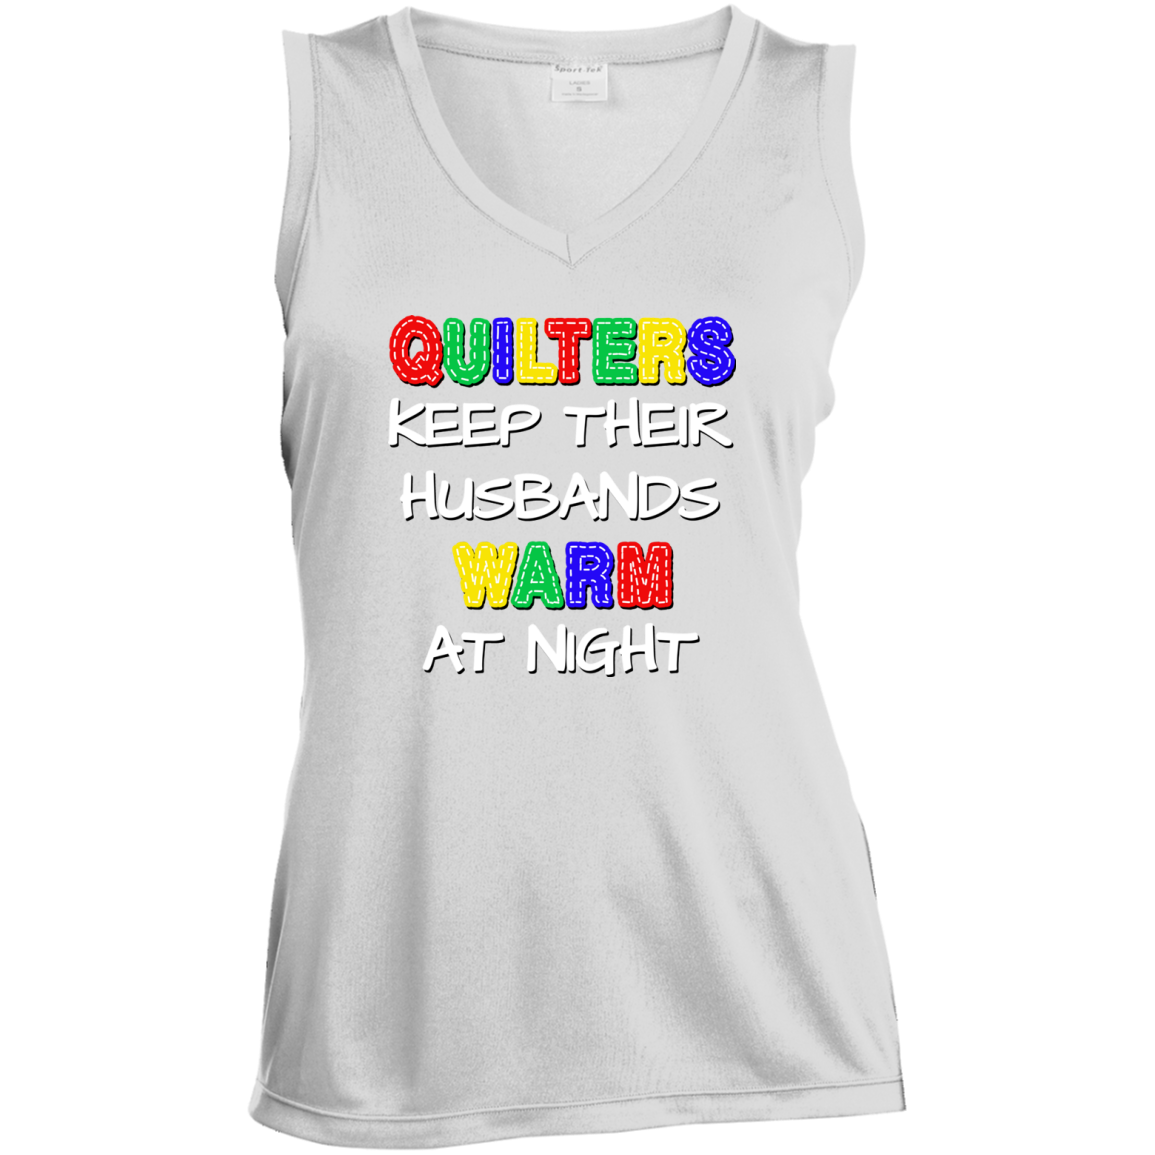 Quilters Keep Their Husbands Warm Ladies Sleeveless Moisture Absorbing V-Neck